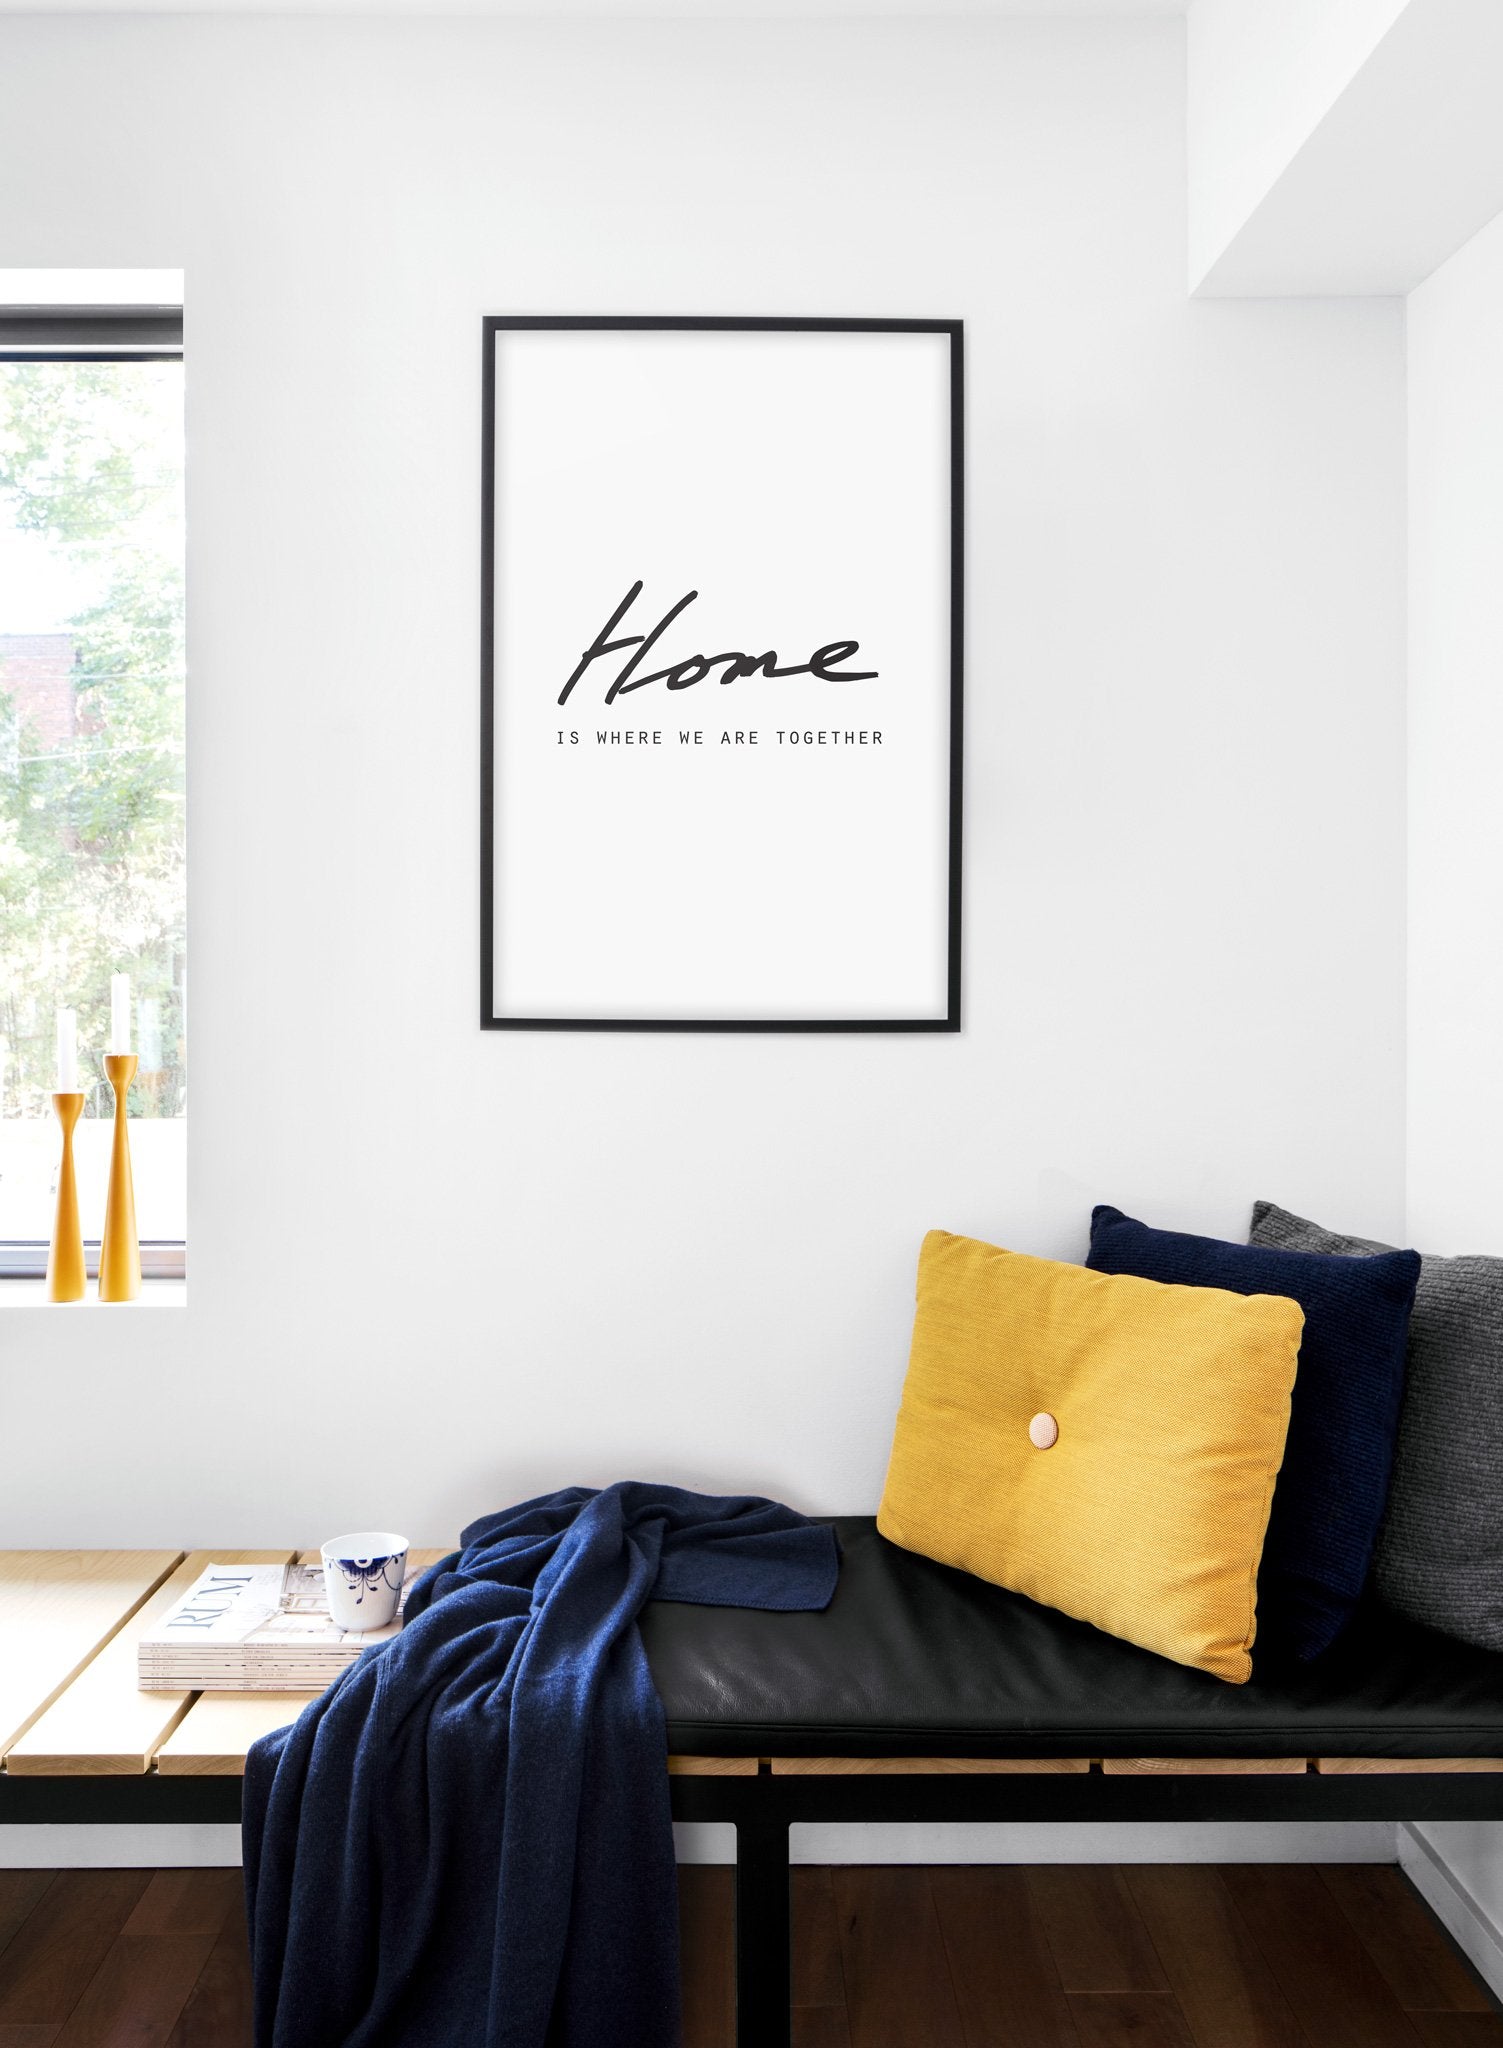 Scandinavian poster with black and white graphic typography design of Home is where we are together - Cozy living room nook